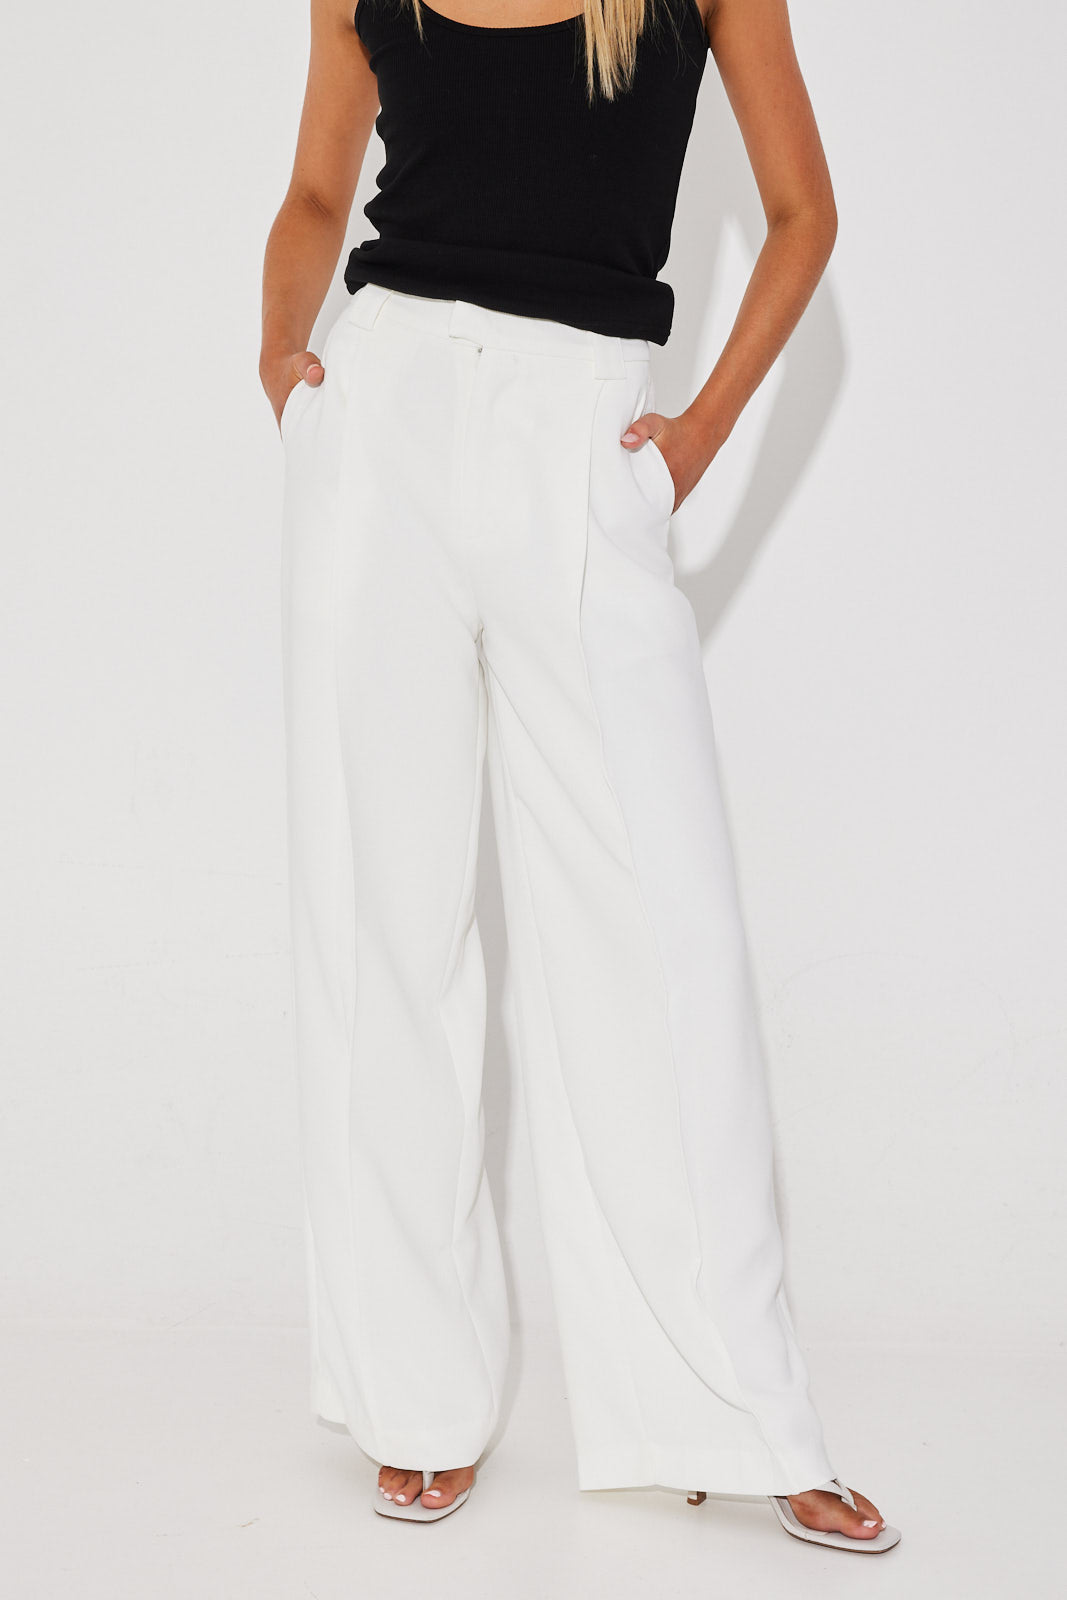 Rossi Pant White - SALE